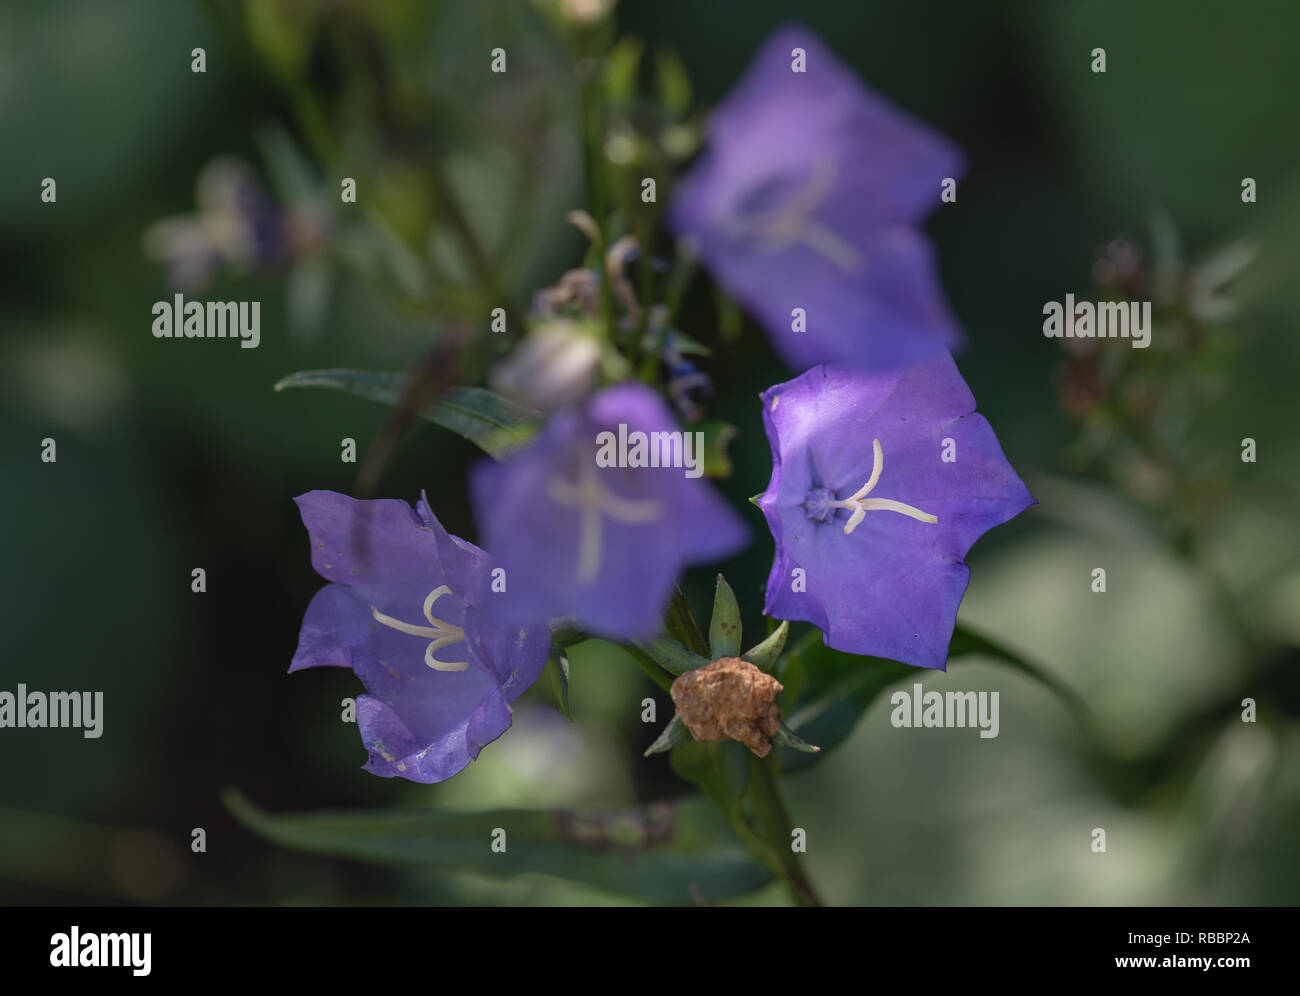 Color outdoor natural floral closeup image of four solated wide open dark violet peach-leaved bellflower blossoms on natural blurred green background Stock Photo